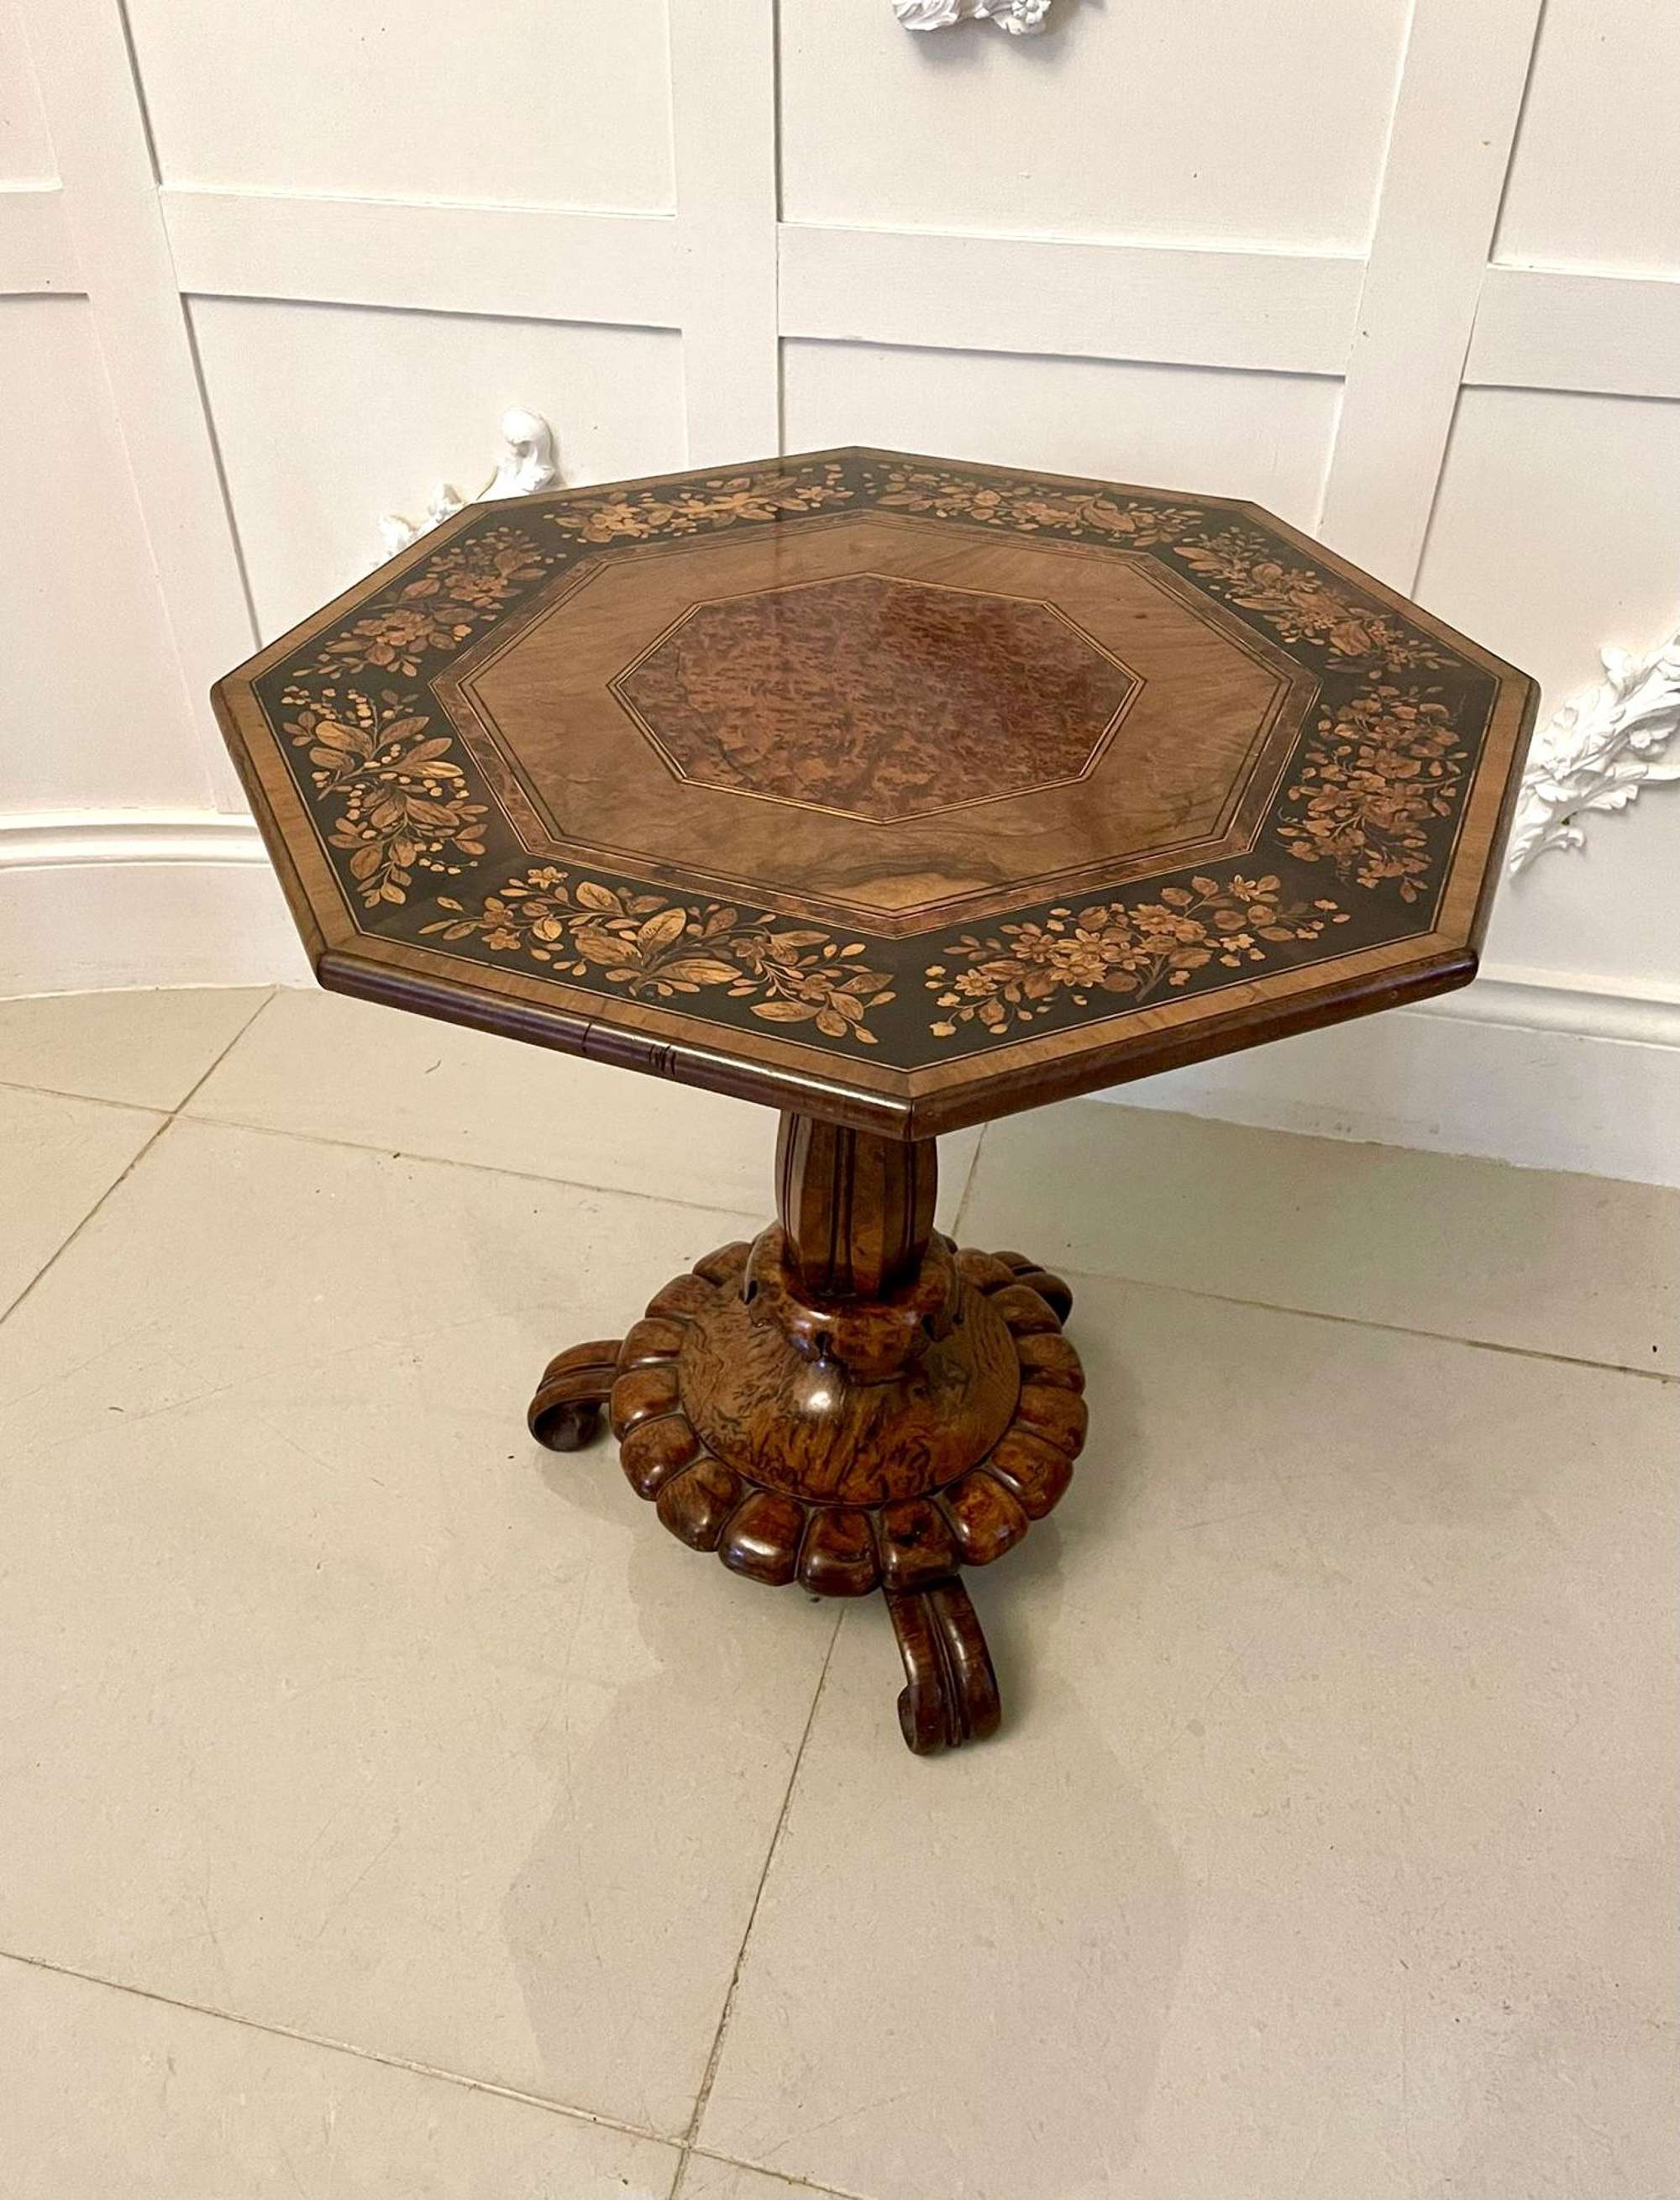 Outstanding Antique Burr Walnut & Amboyna Marquetry Inlaid Lamp Table